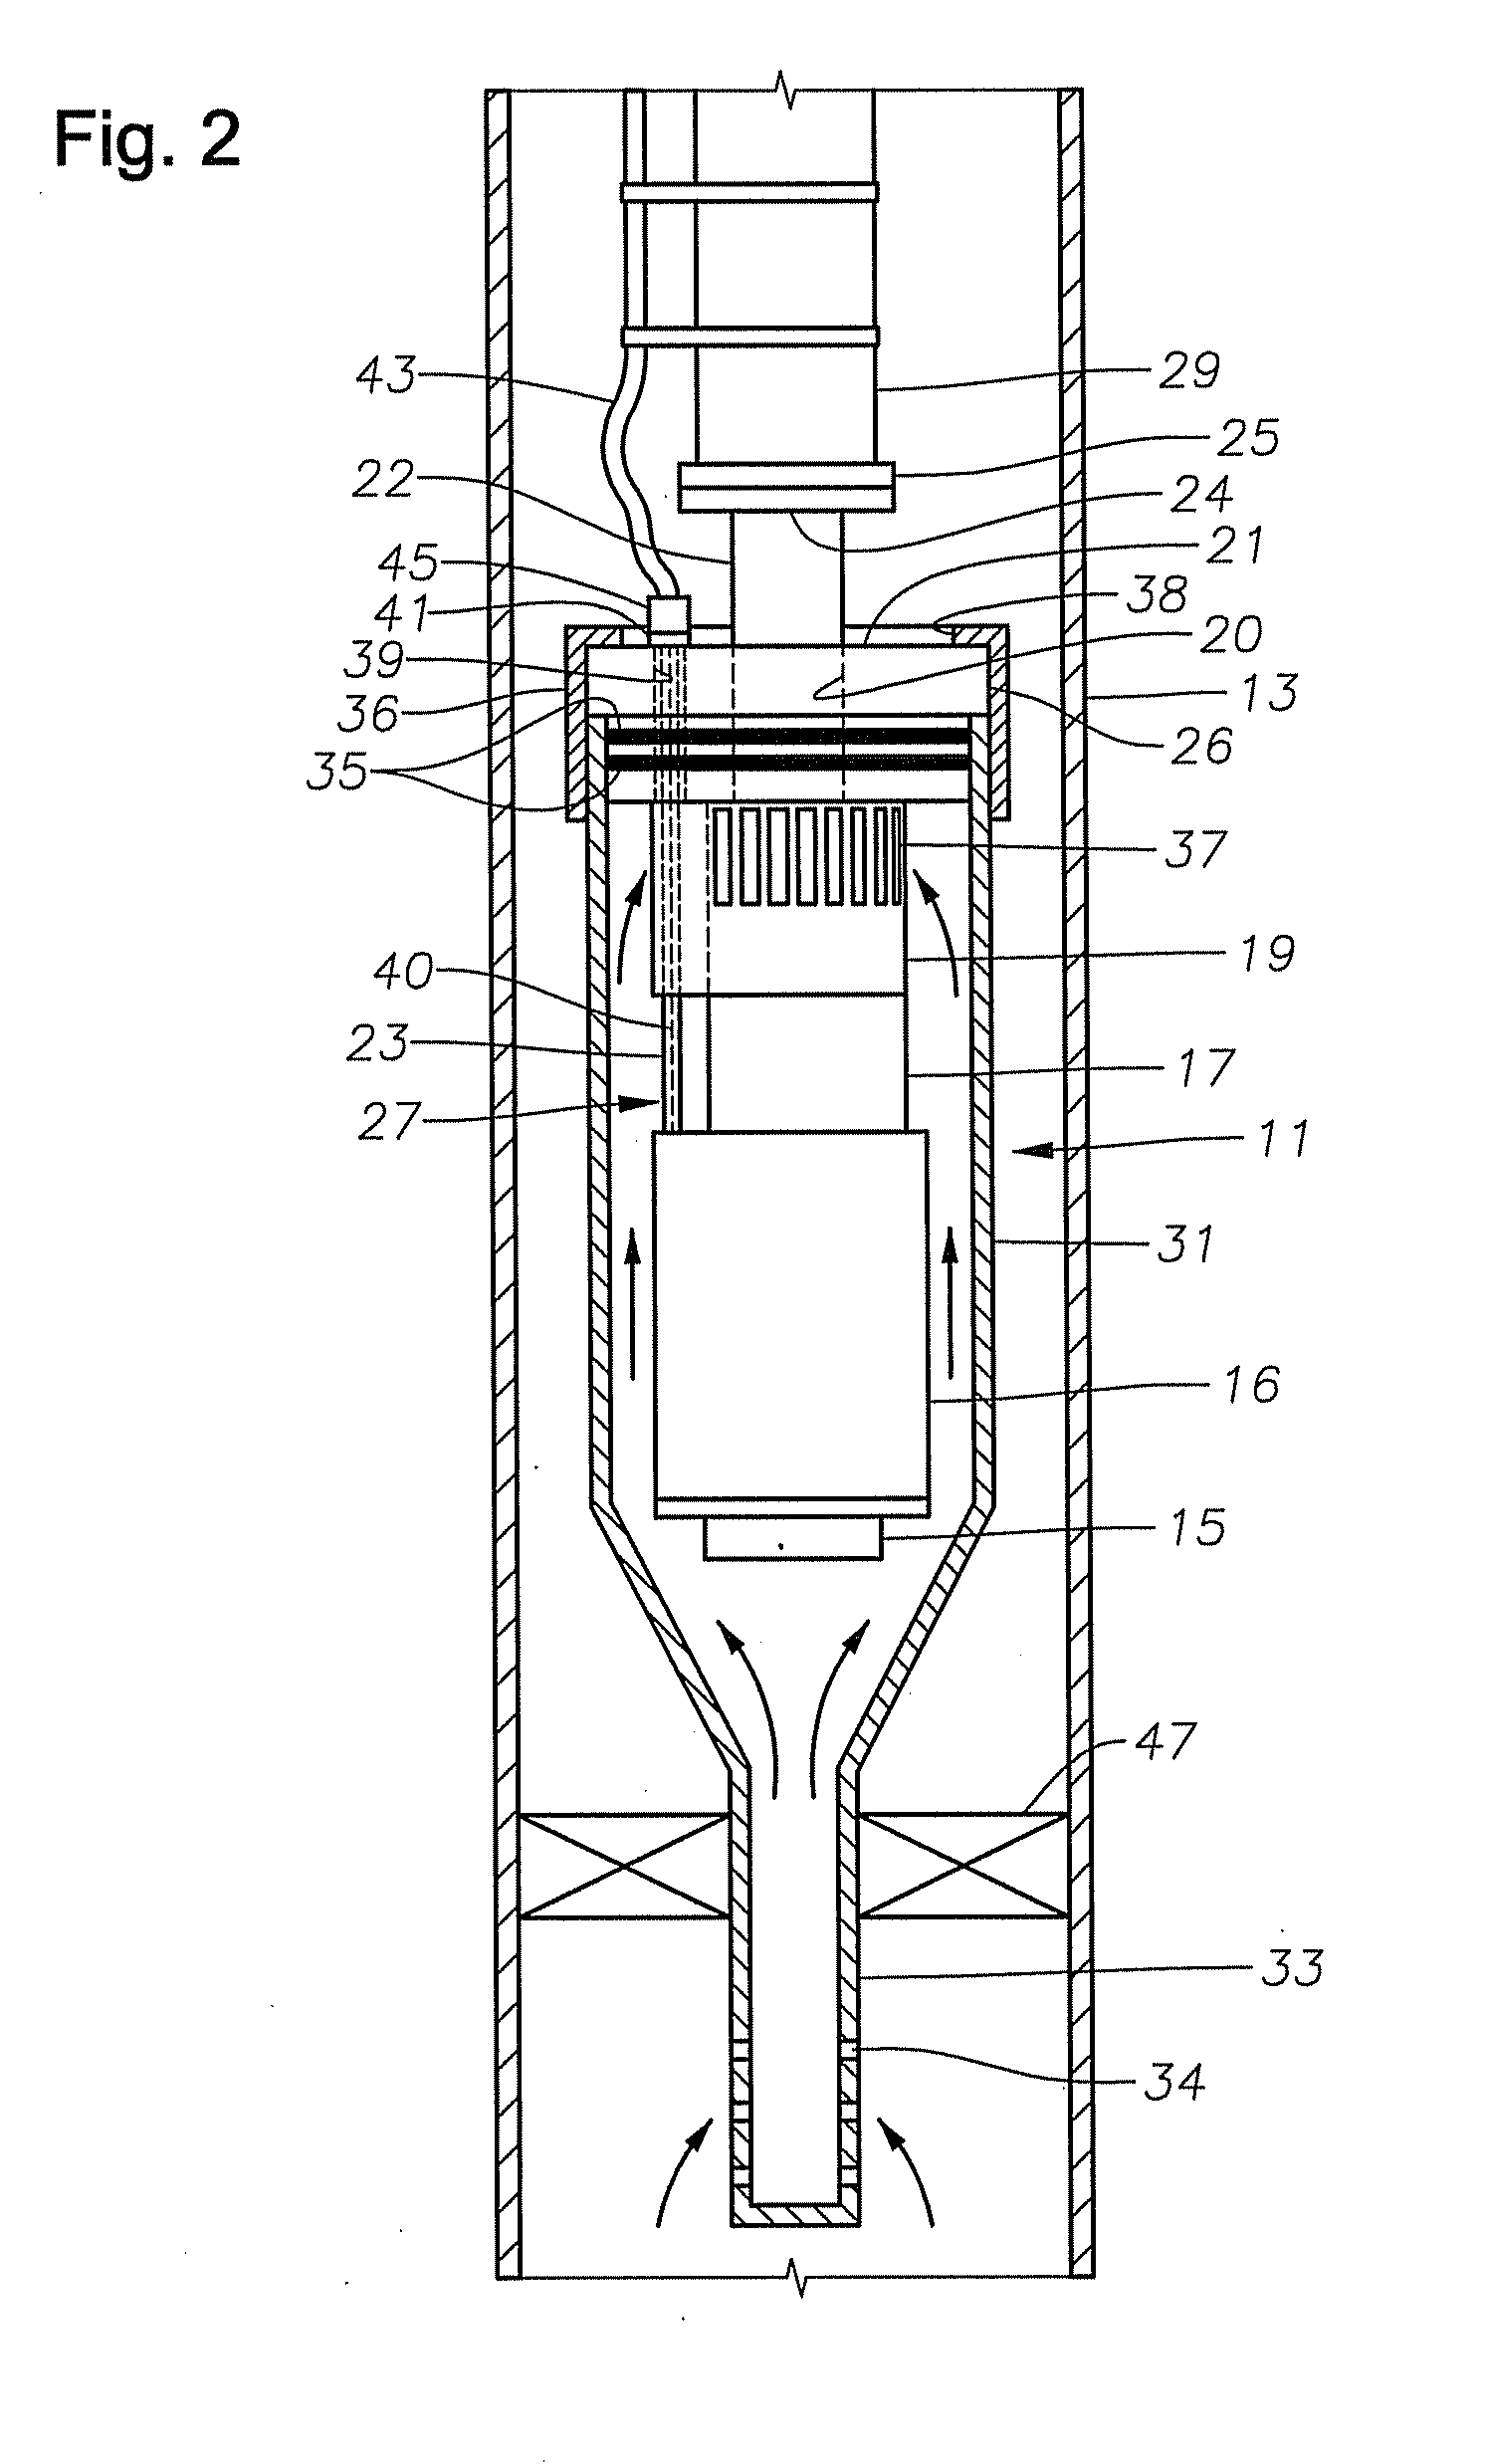 Intake For Shrouded Electric Submersible Pump Assembly